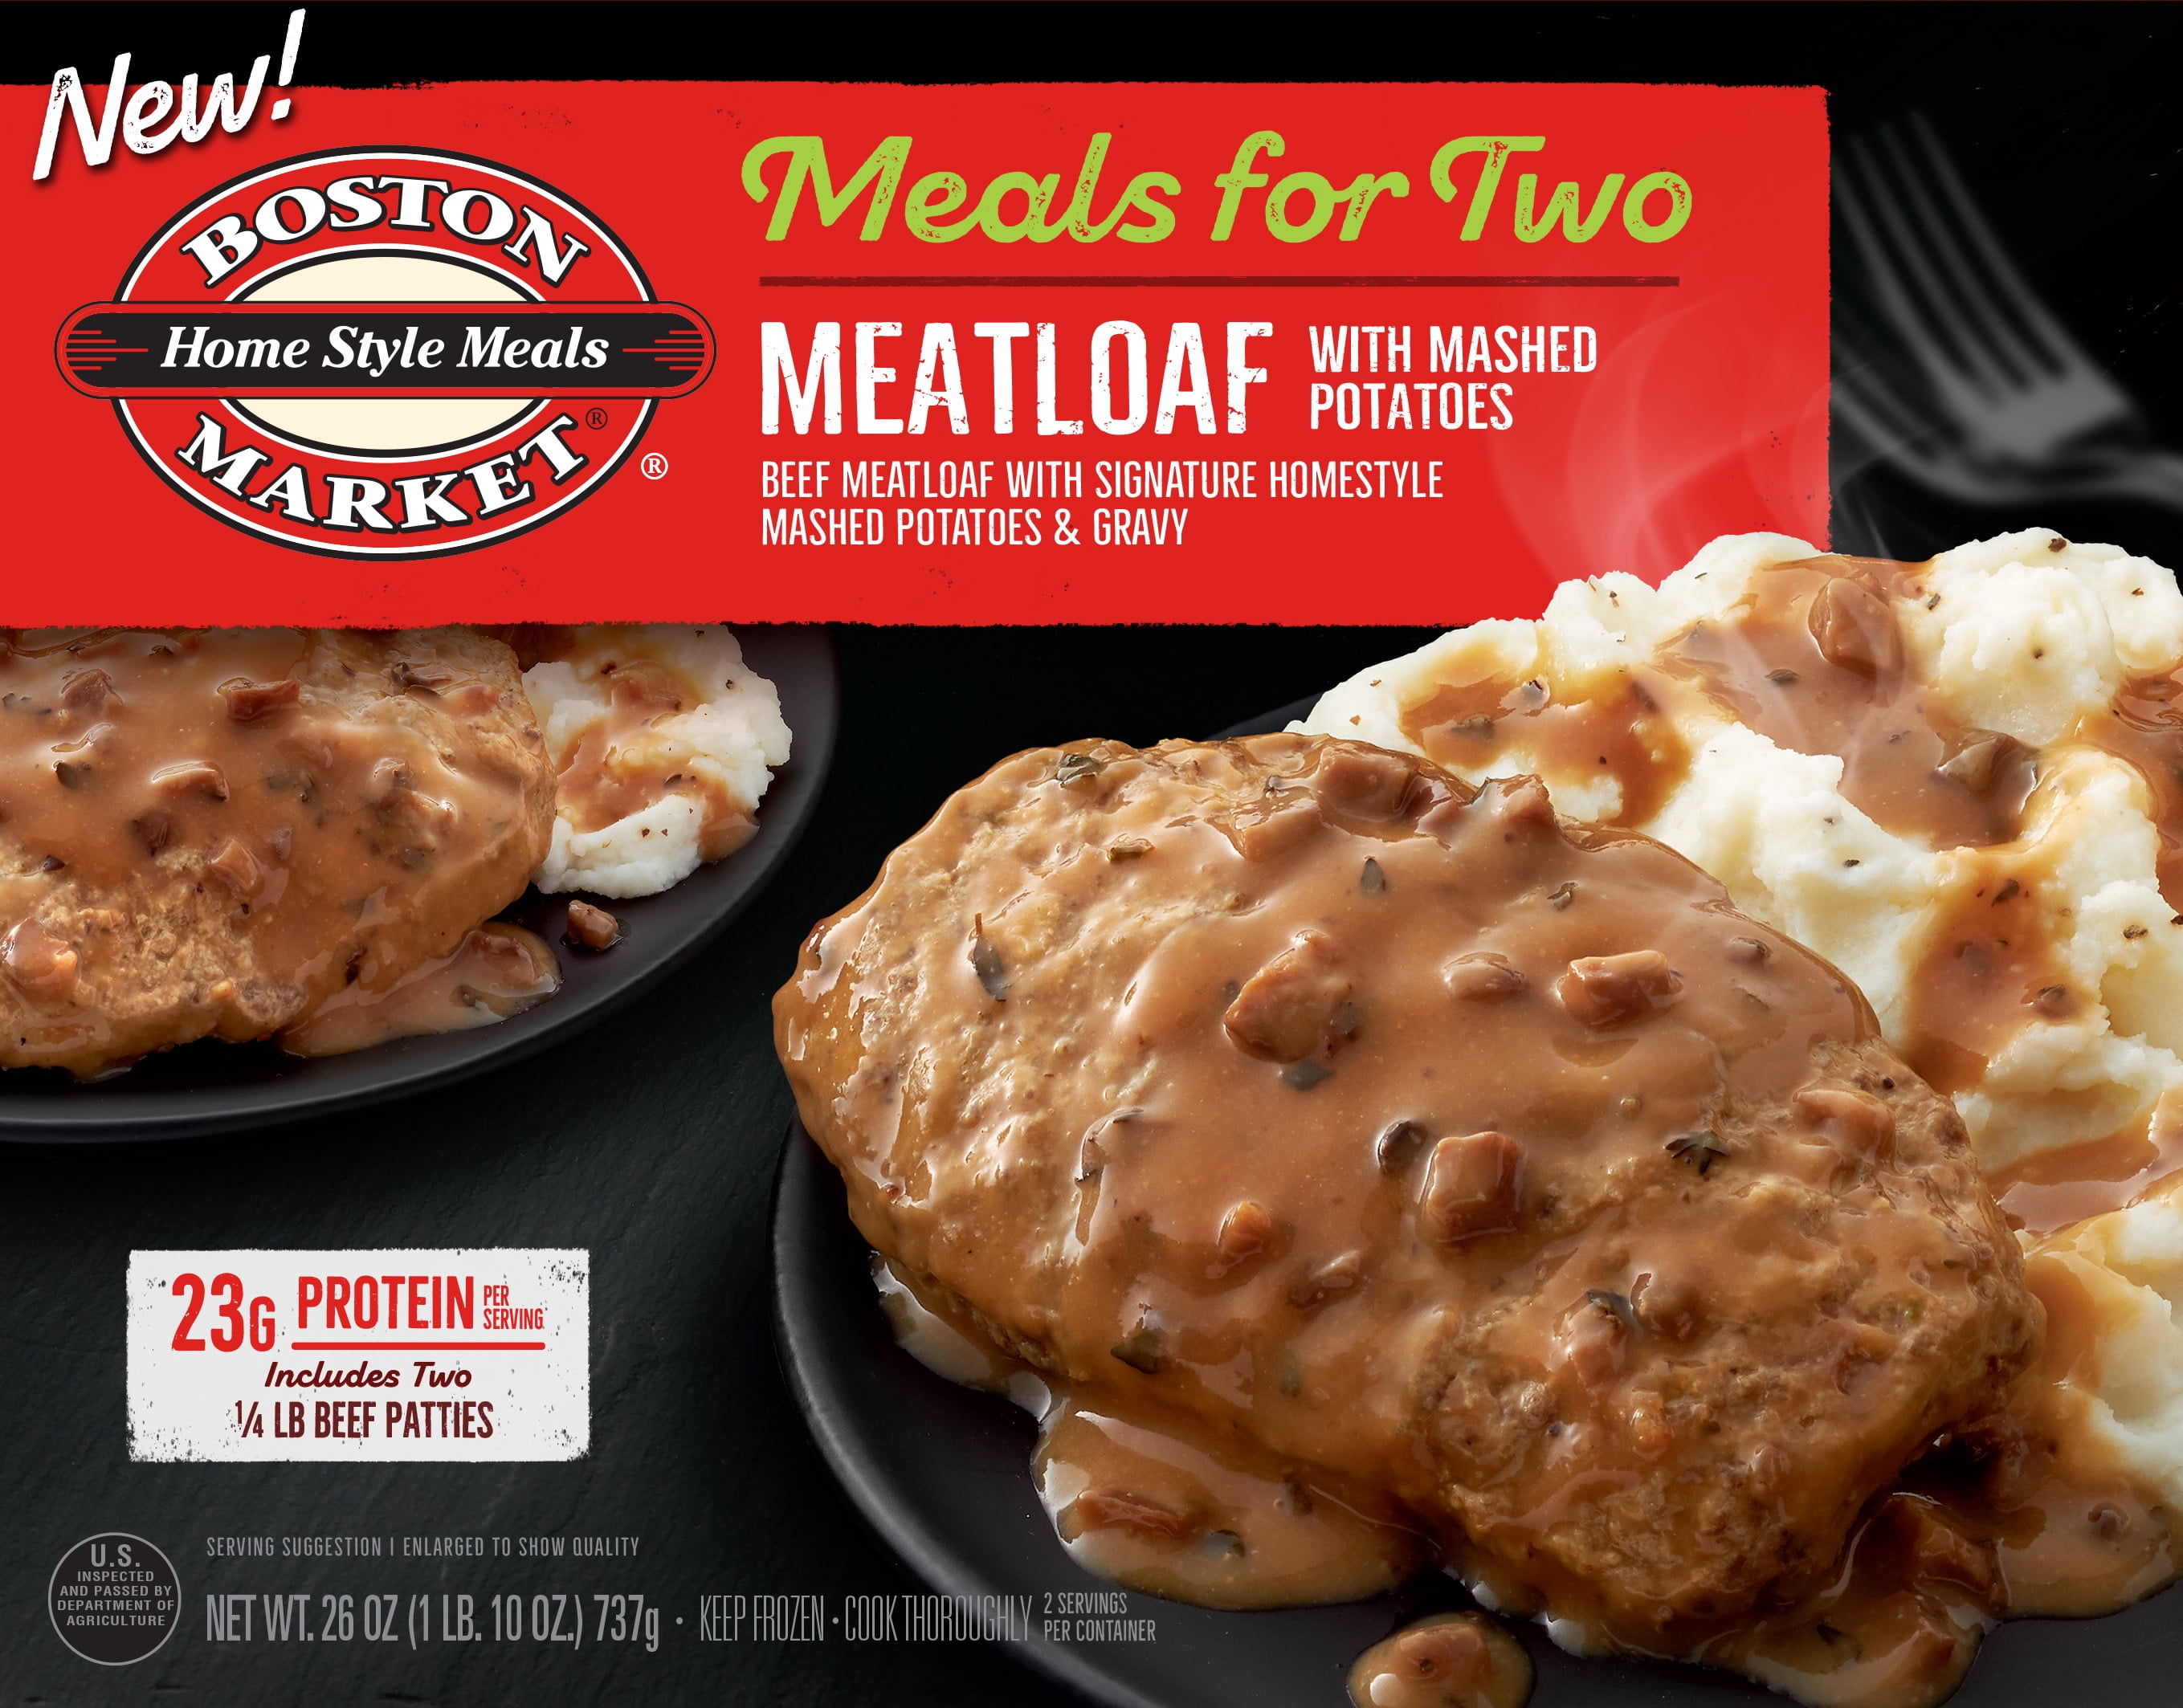 Boston Market Meals For Two Meatloaf